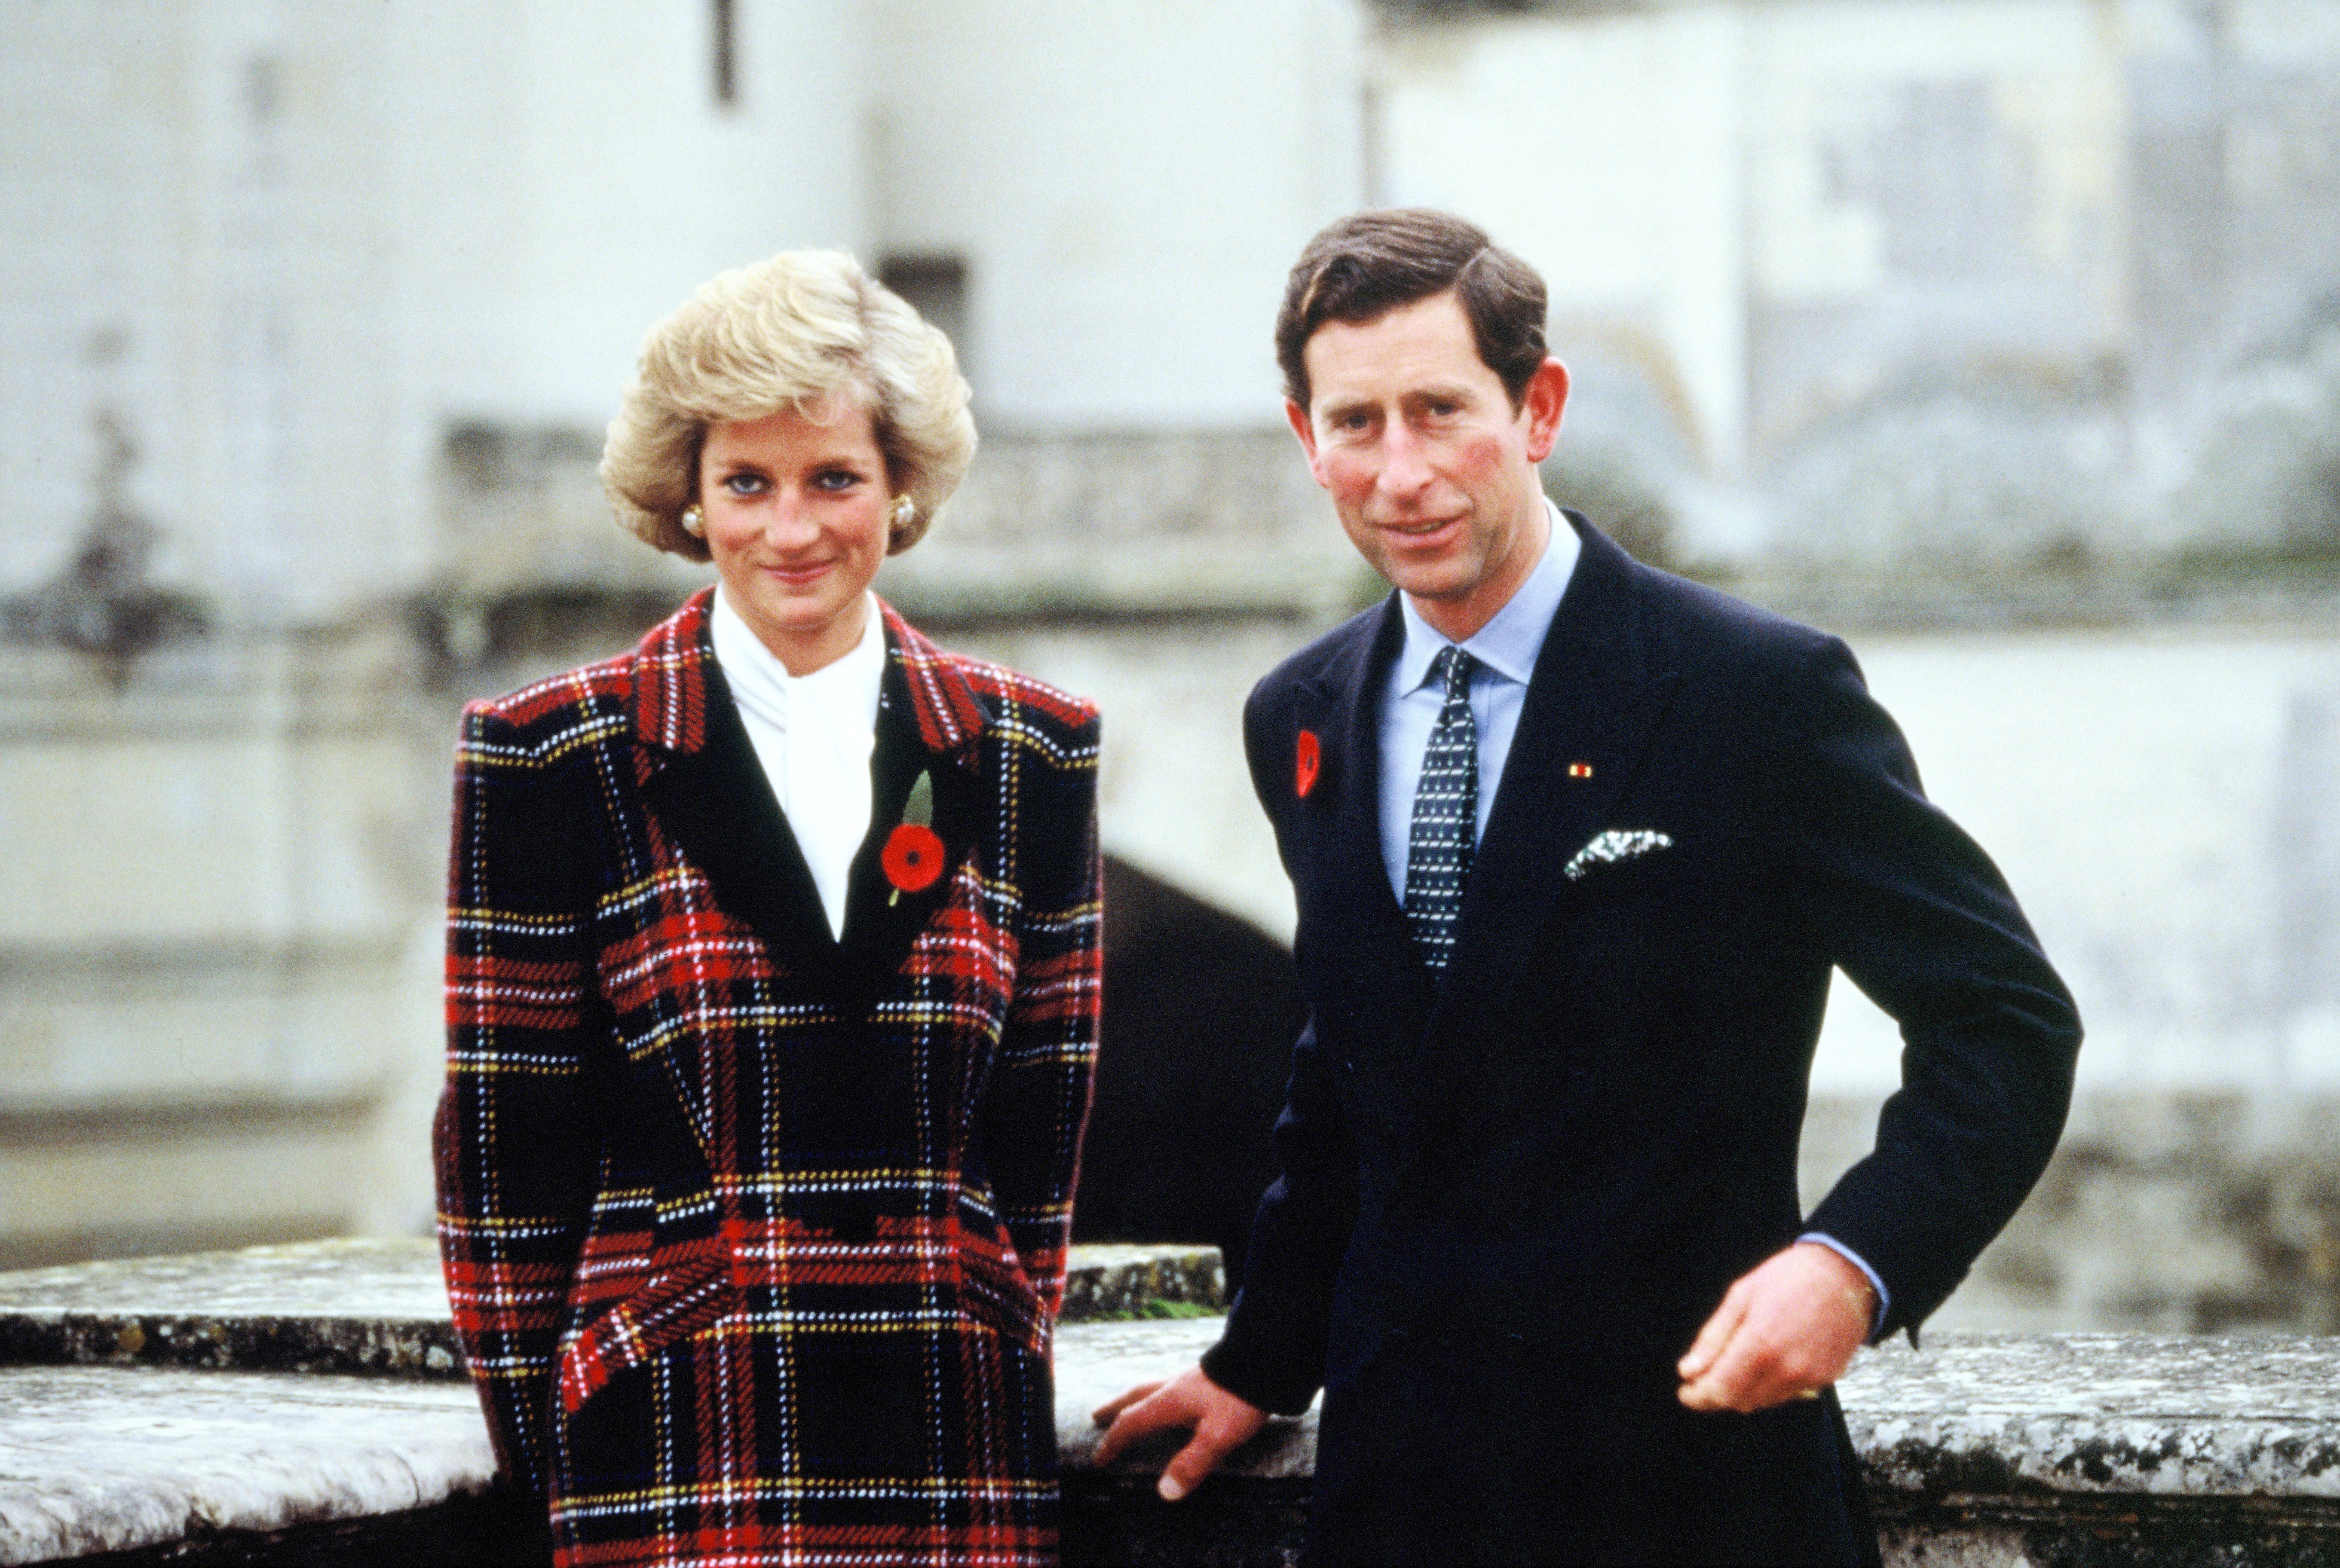 Prince Charles and Princess Diana pose outside Chateau de Chambord during their official visit to France on November 9, 1988 in Chambord, France | Source: Getty Images